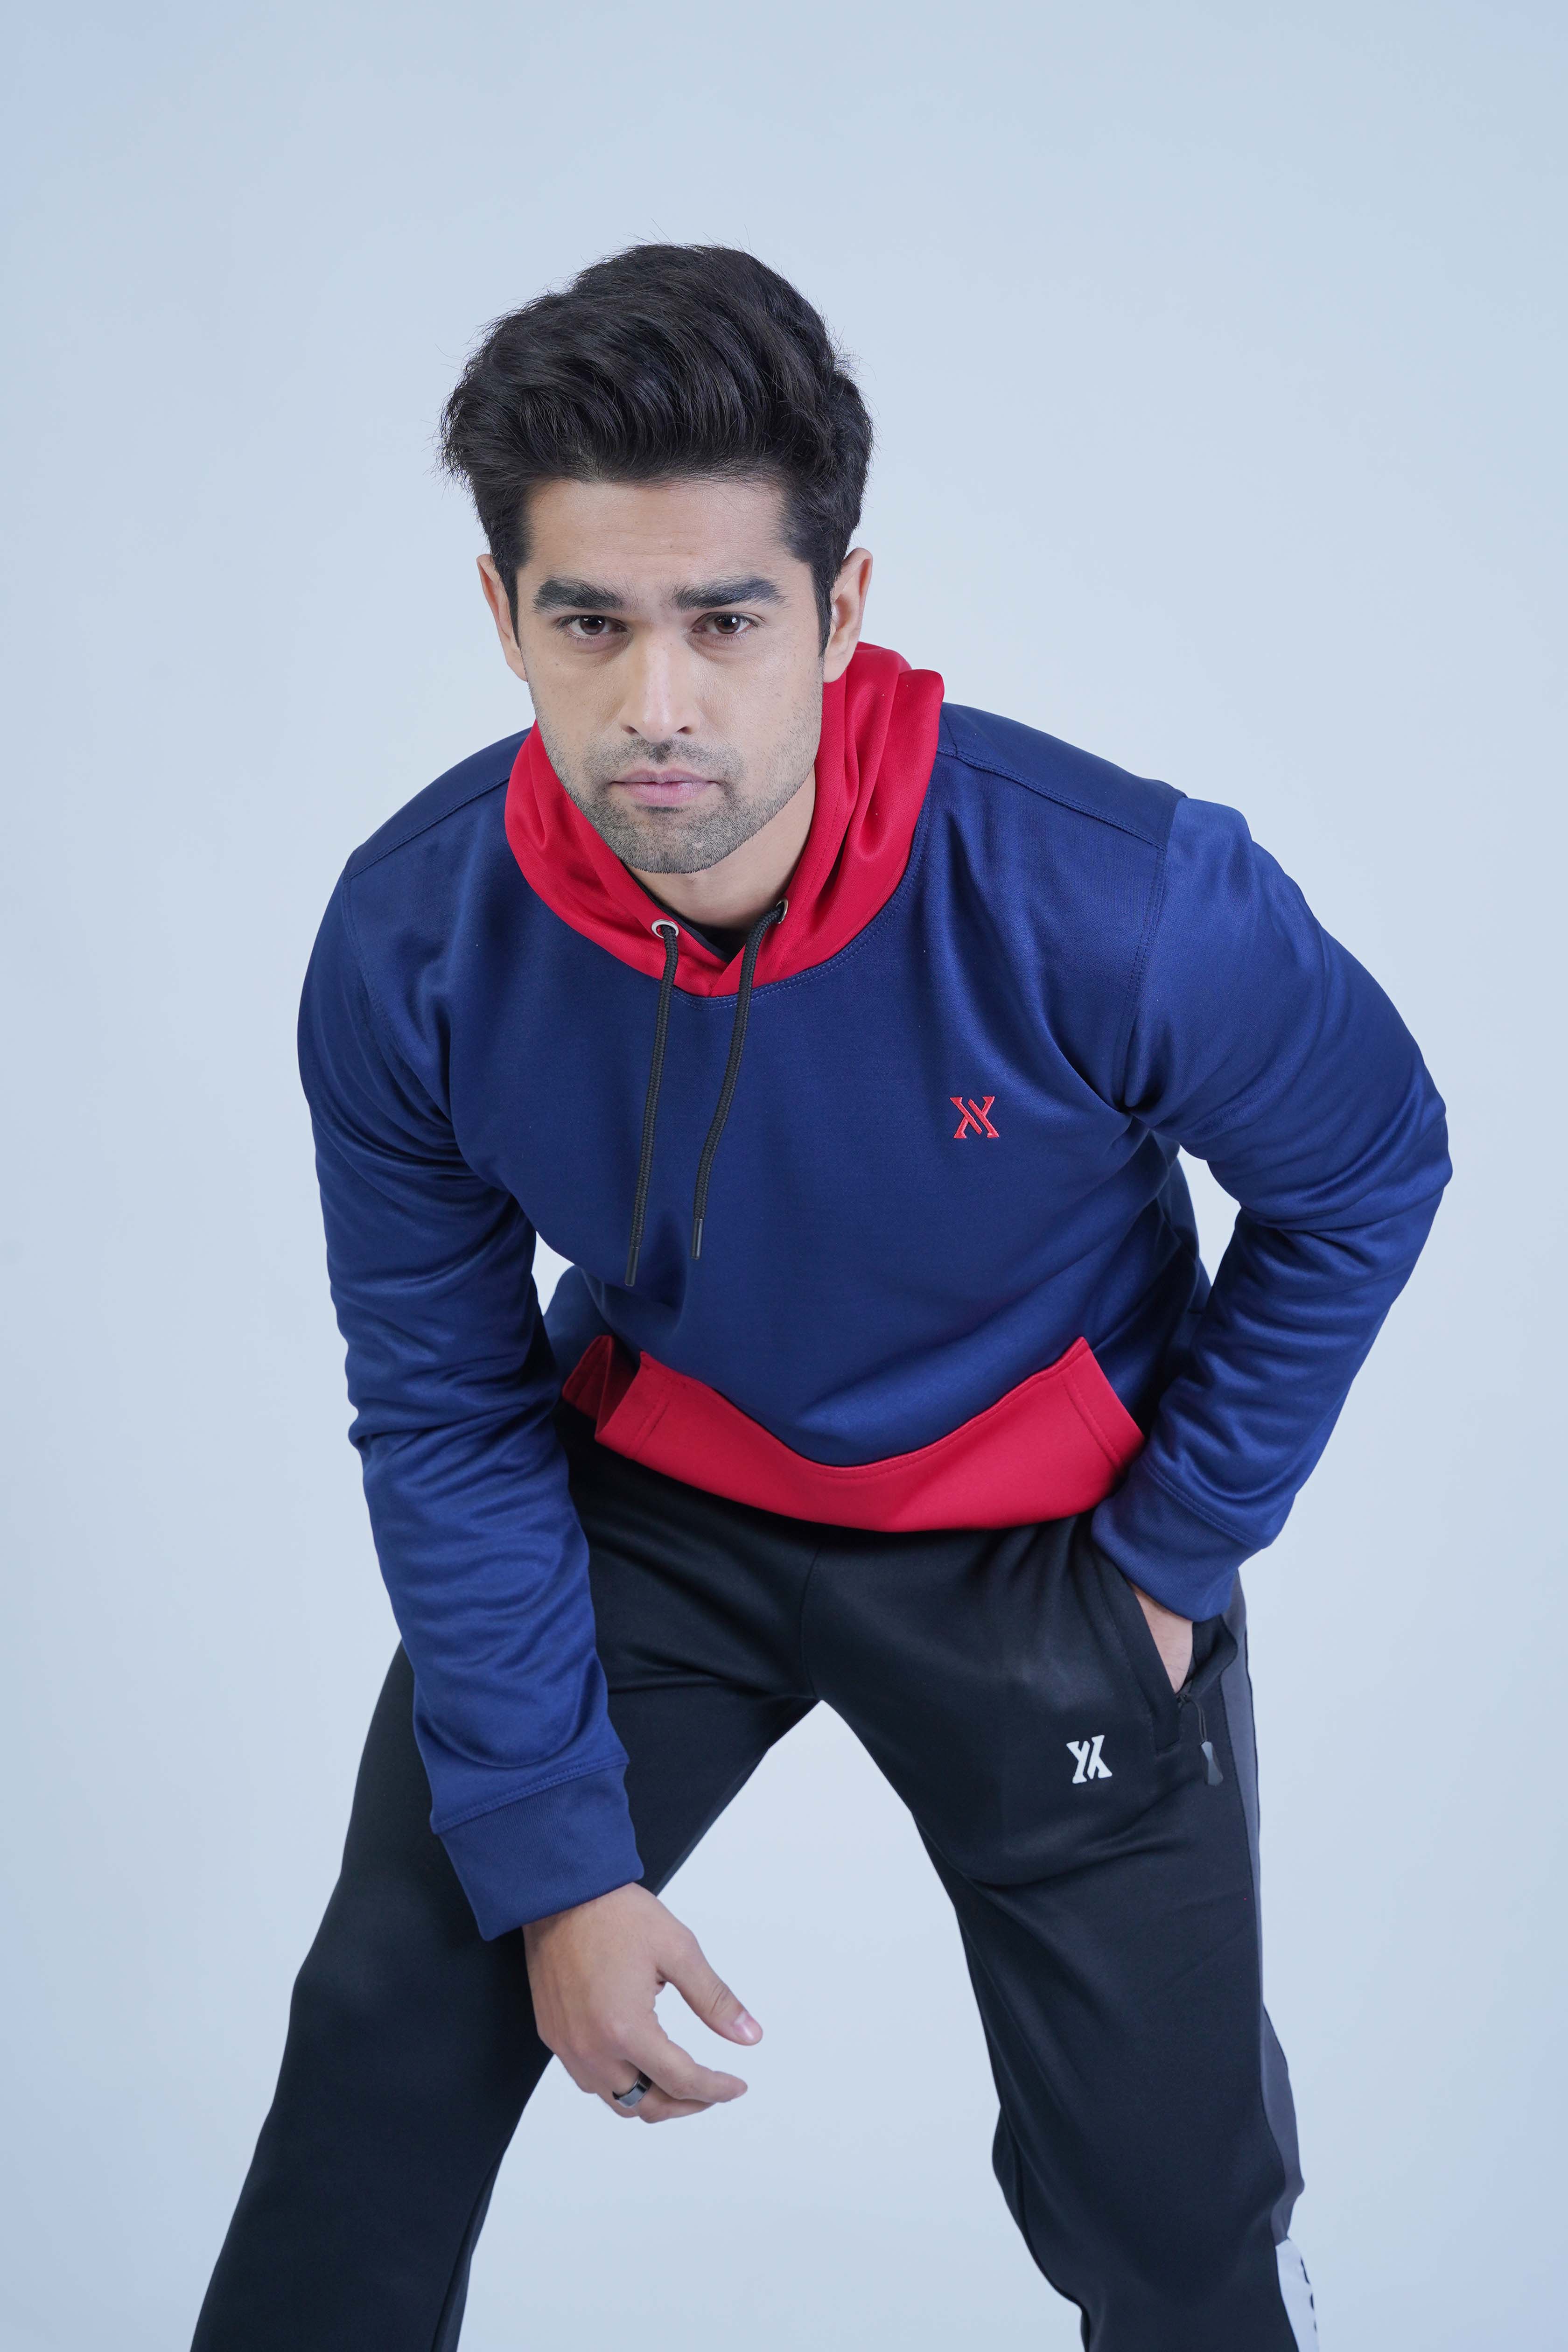 Relaxed Fit Navy Blue Hoodie - The Xea Men's Clothing Collection